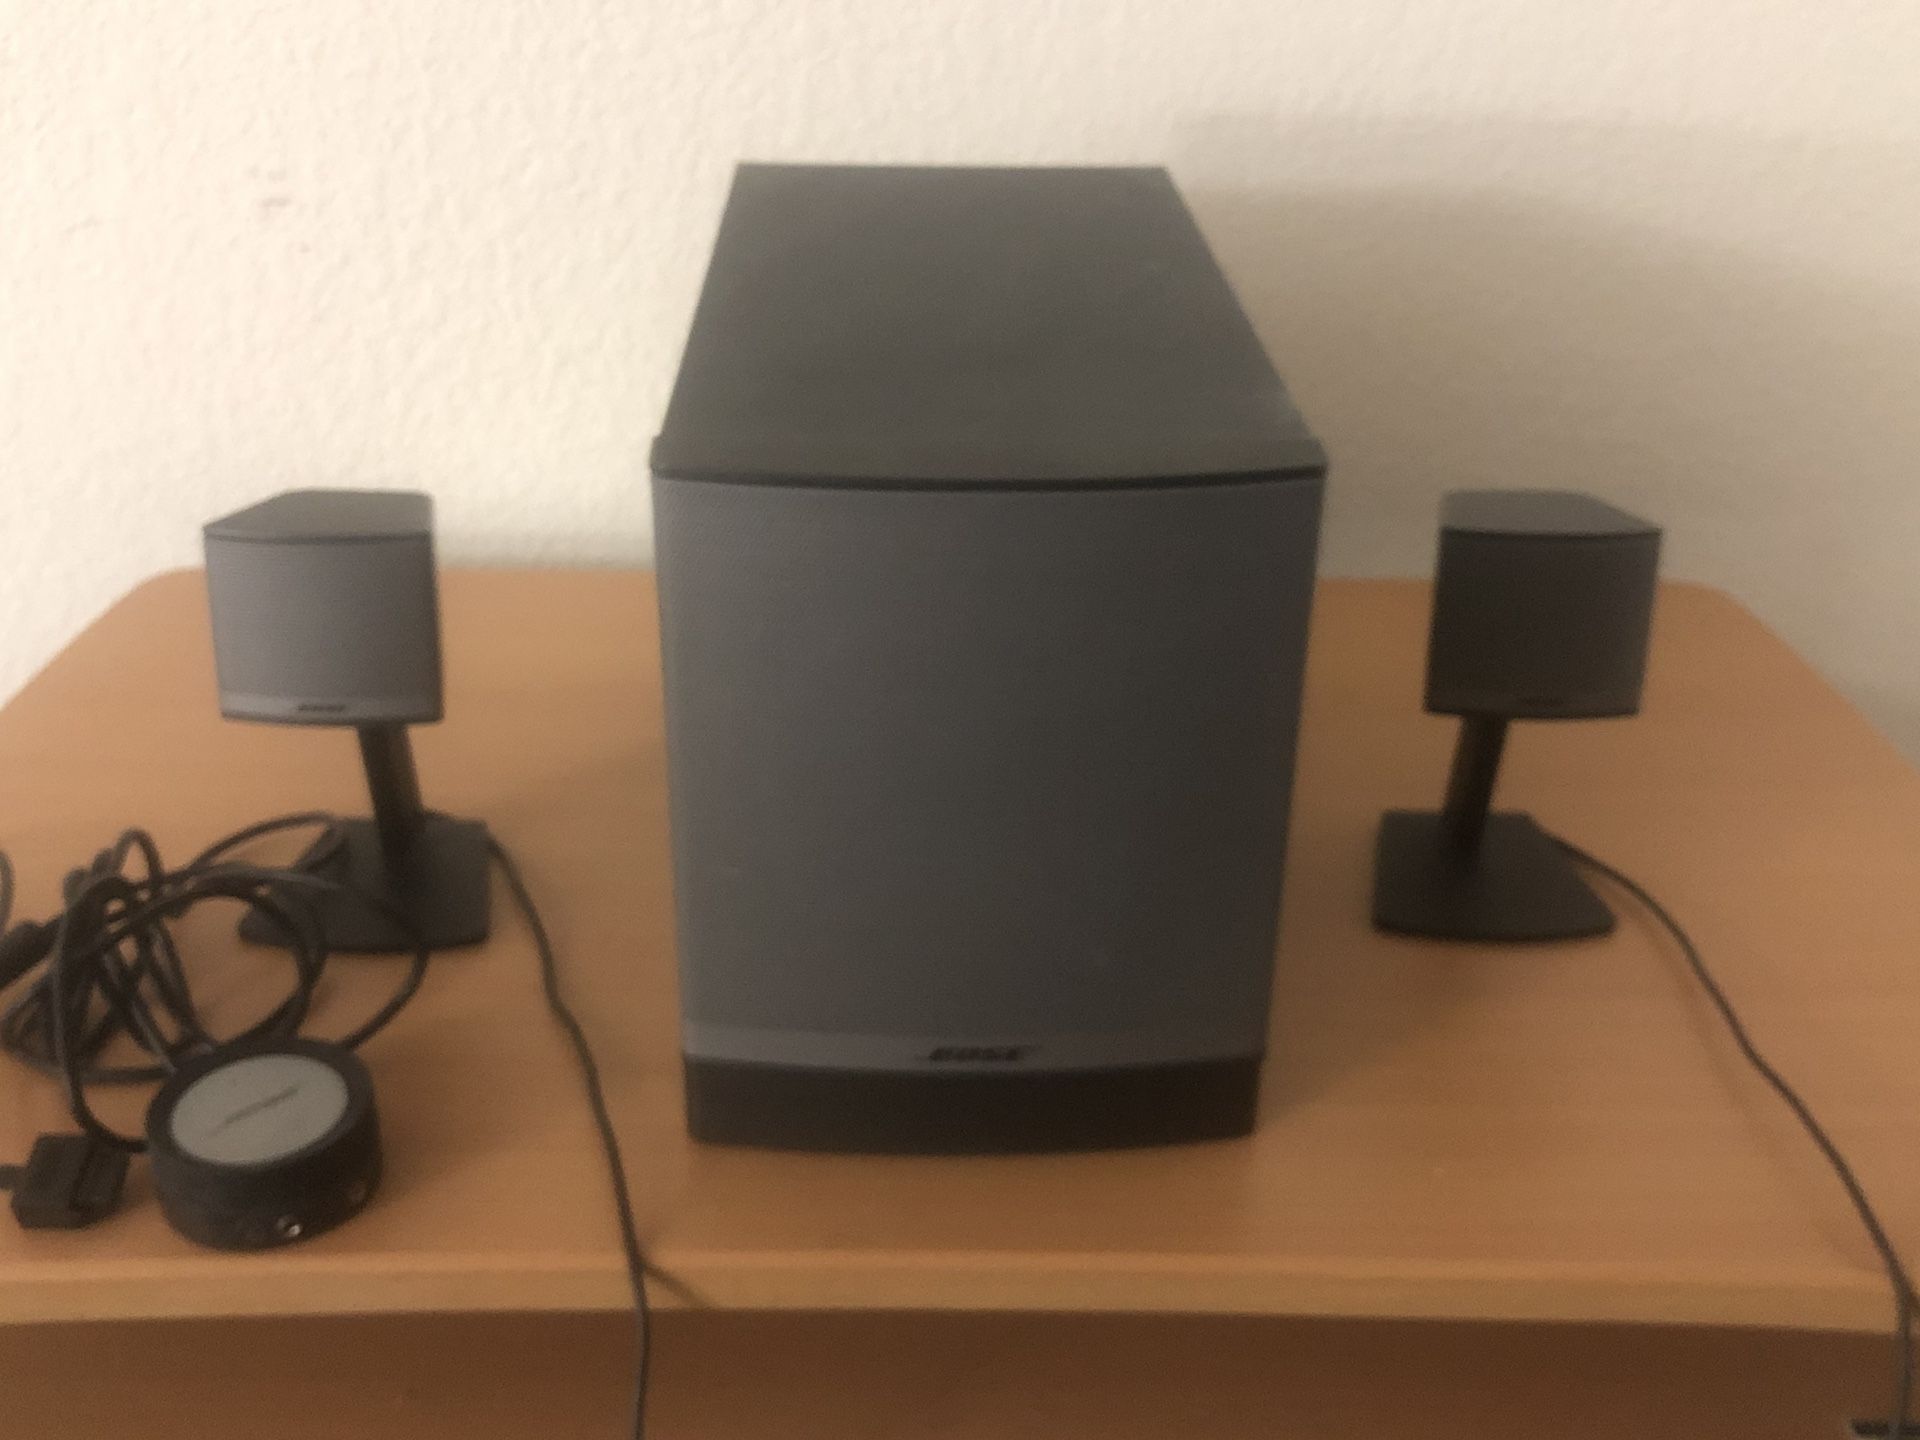 Bose Speaker & woofer- Excellent Sound and nice for music anywhere - Must go Sale